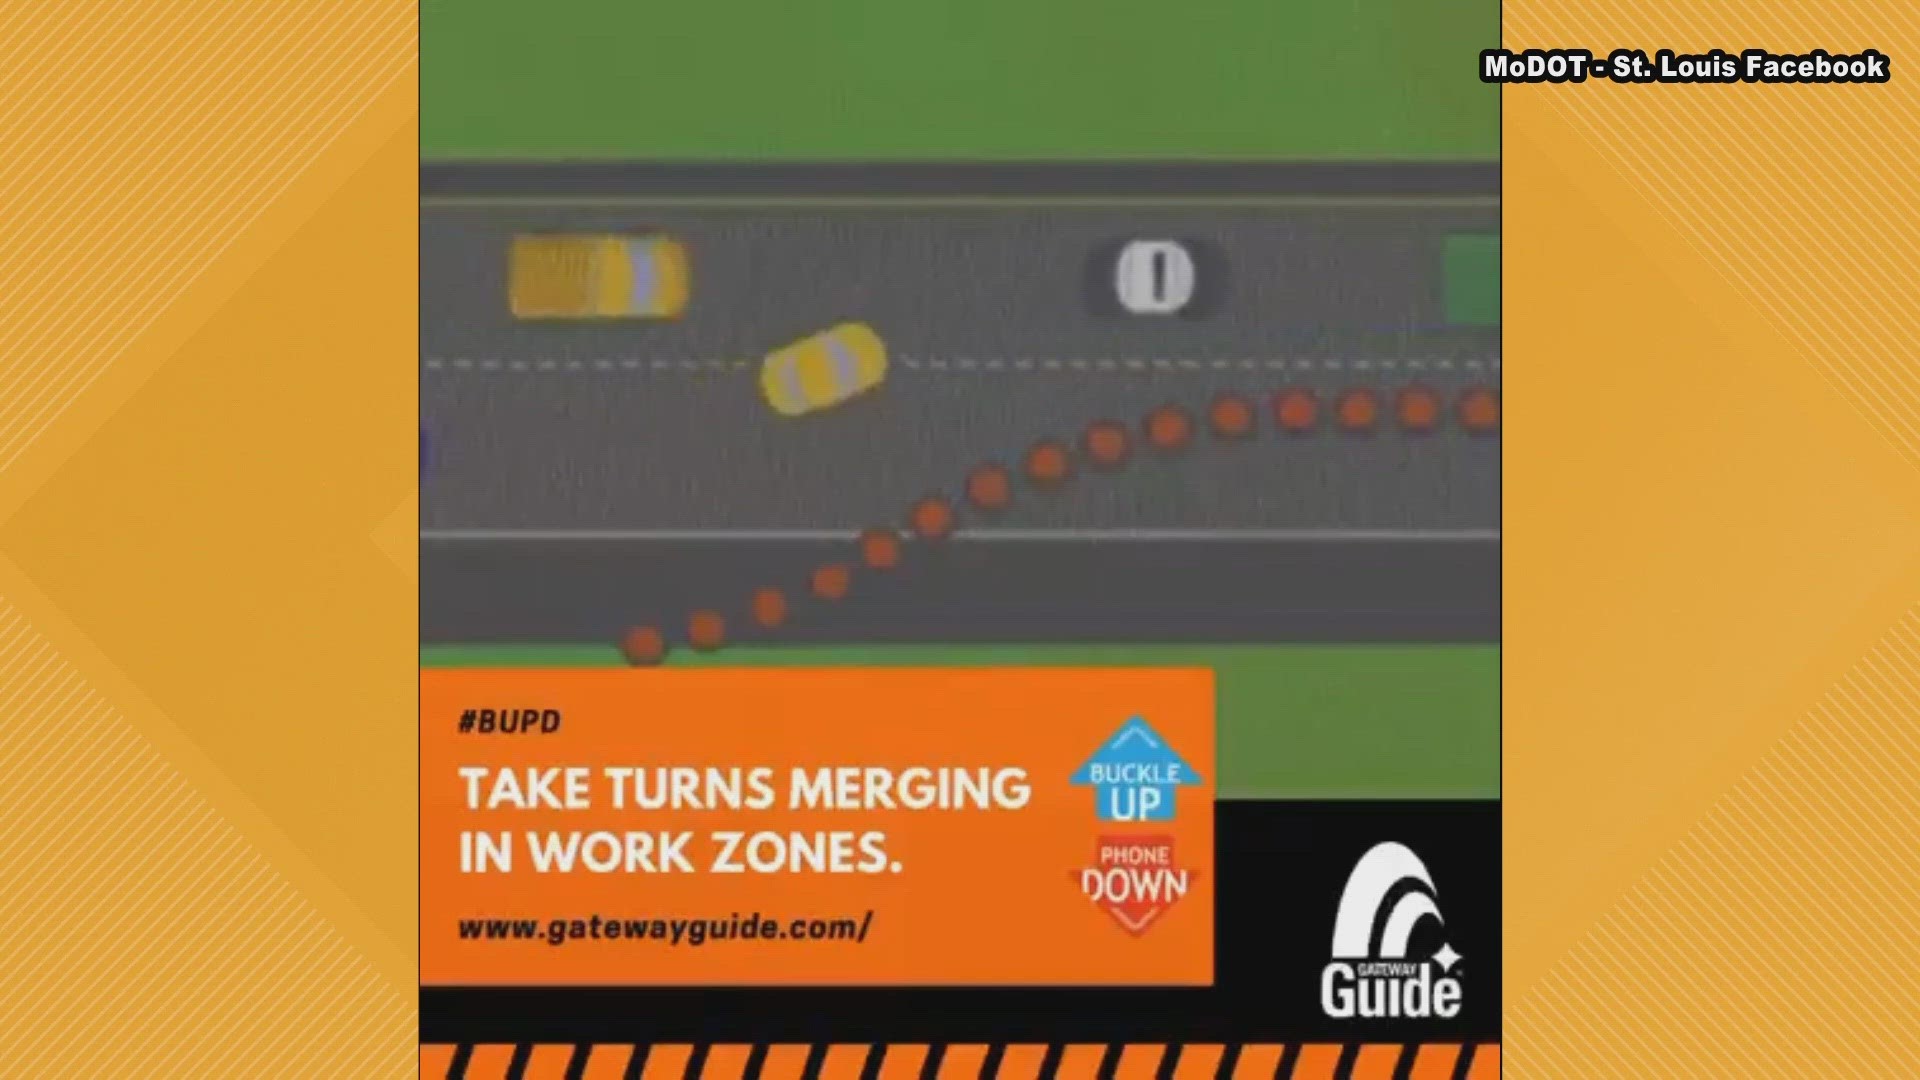 The zipper merge can decrease traffic by 40%. So, why are drivers not using the zipper merge technique?